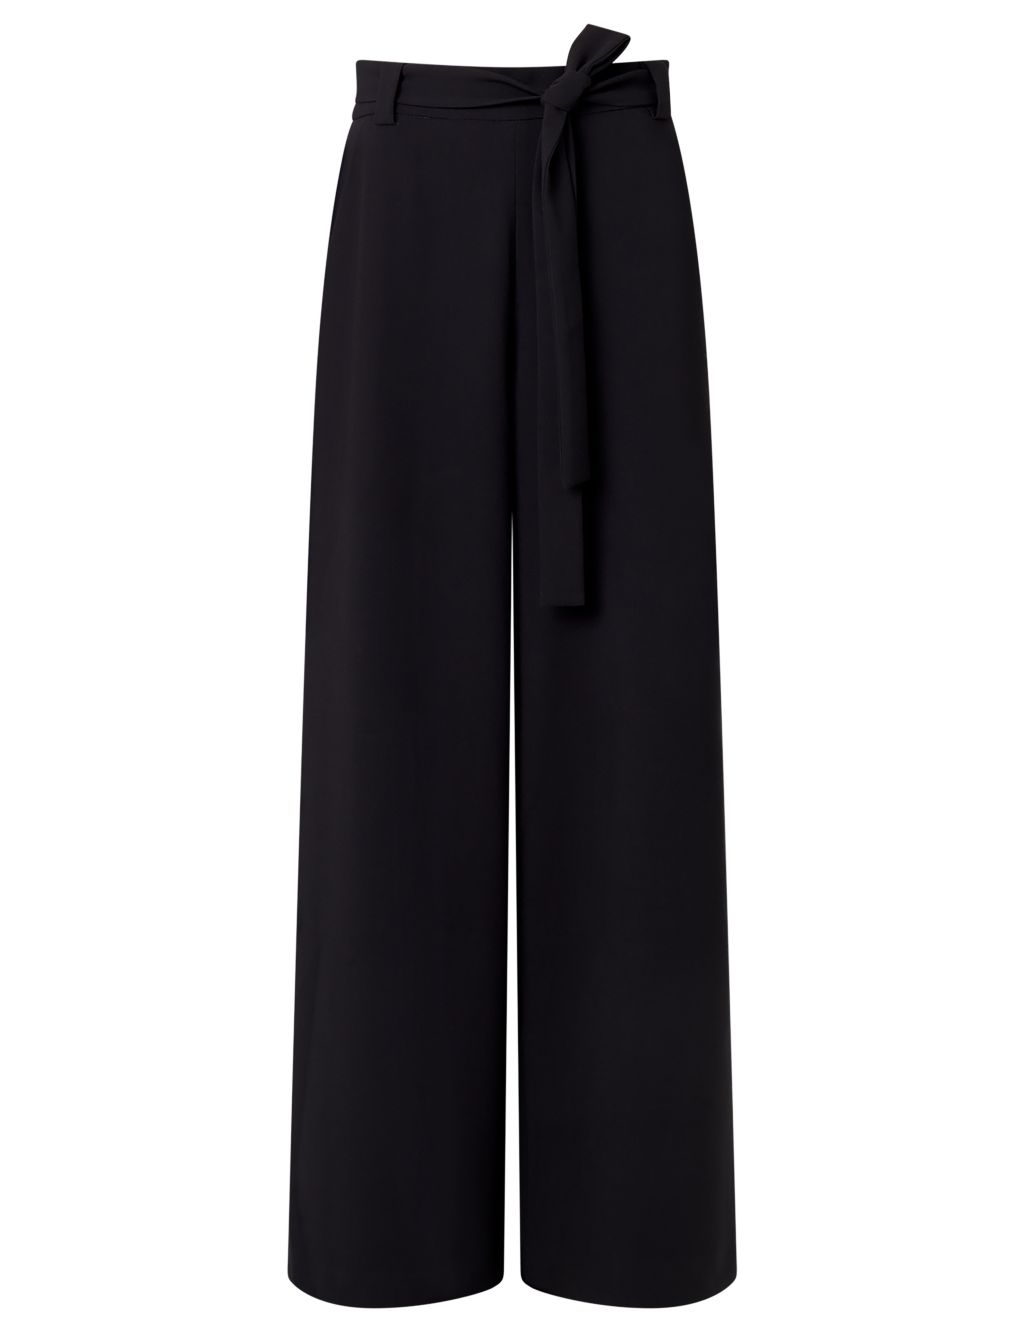 Belted Relaxed Wide Leg Trousers image 2